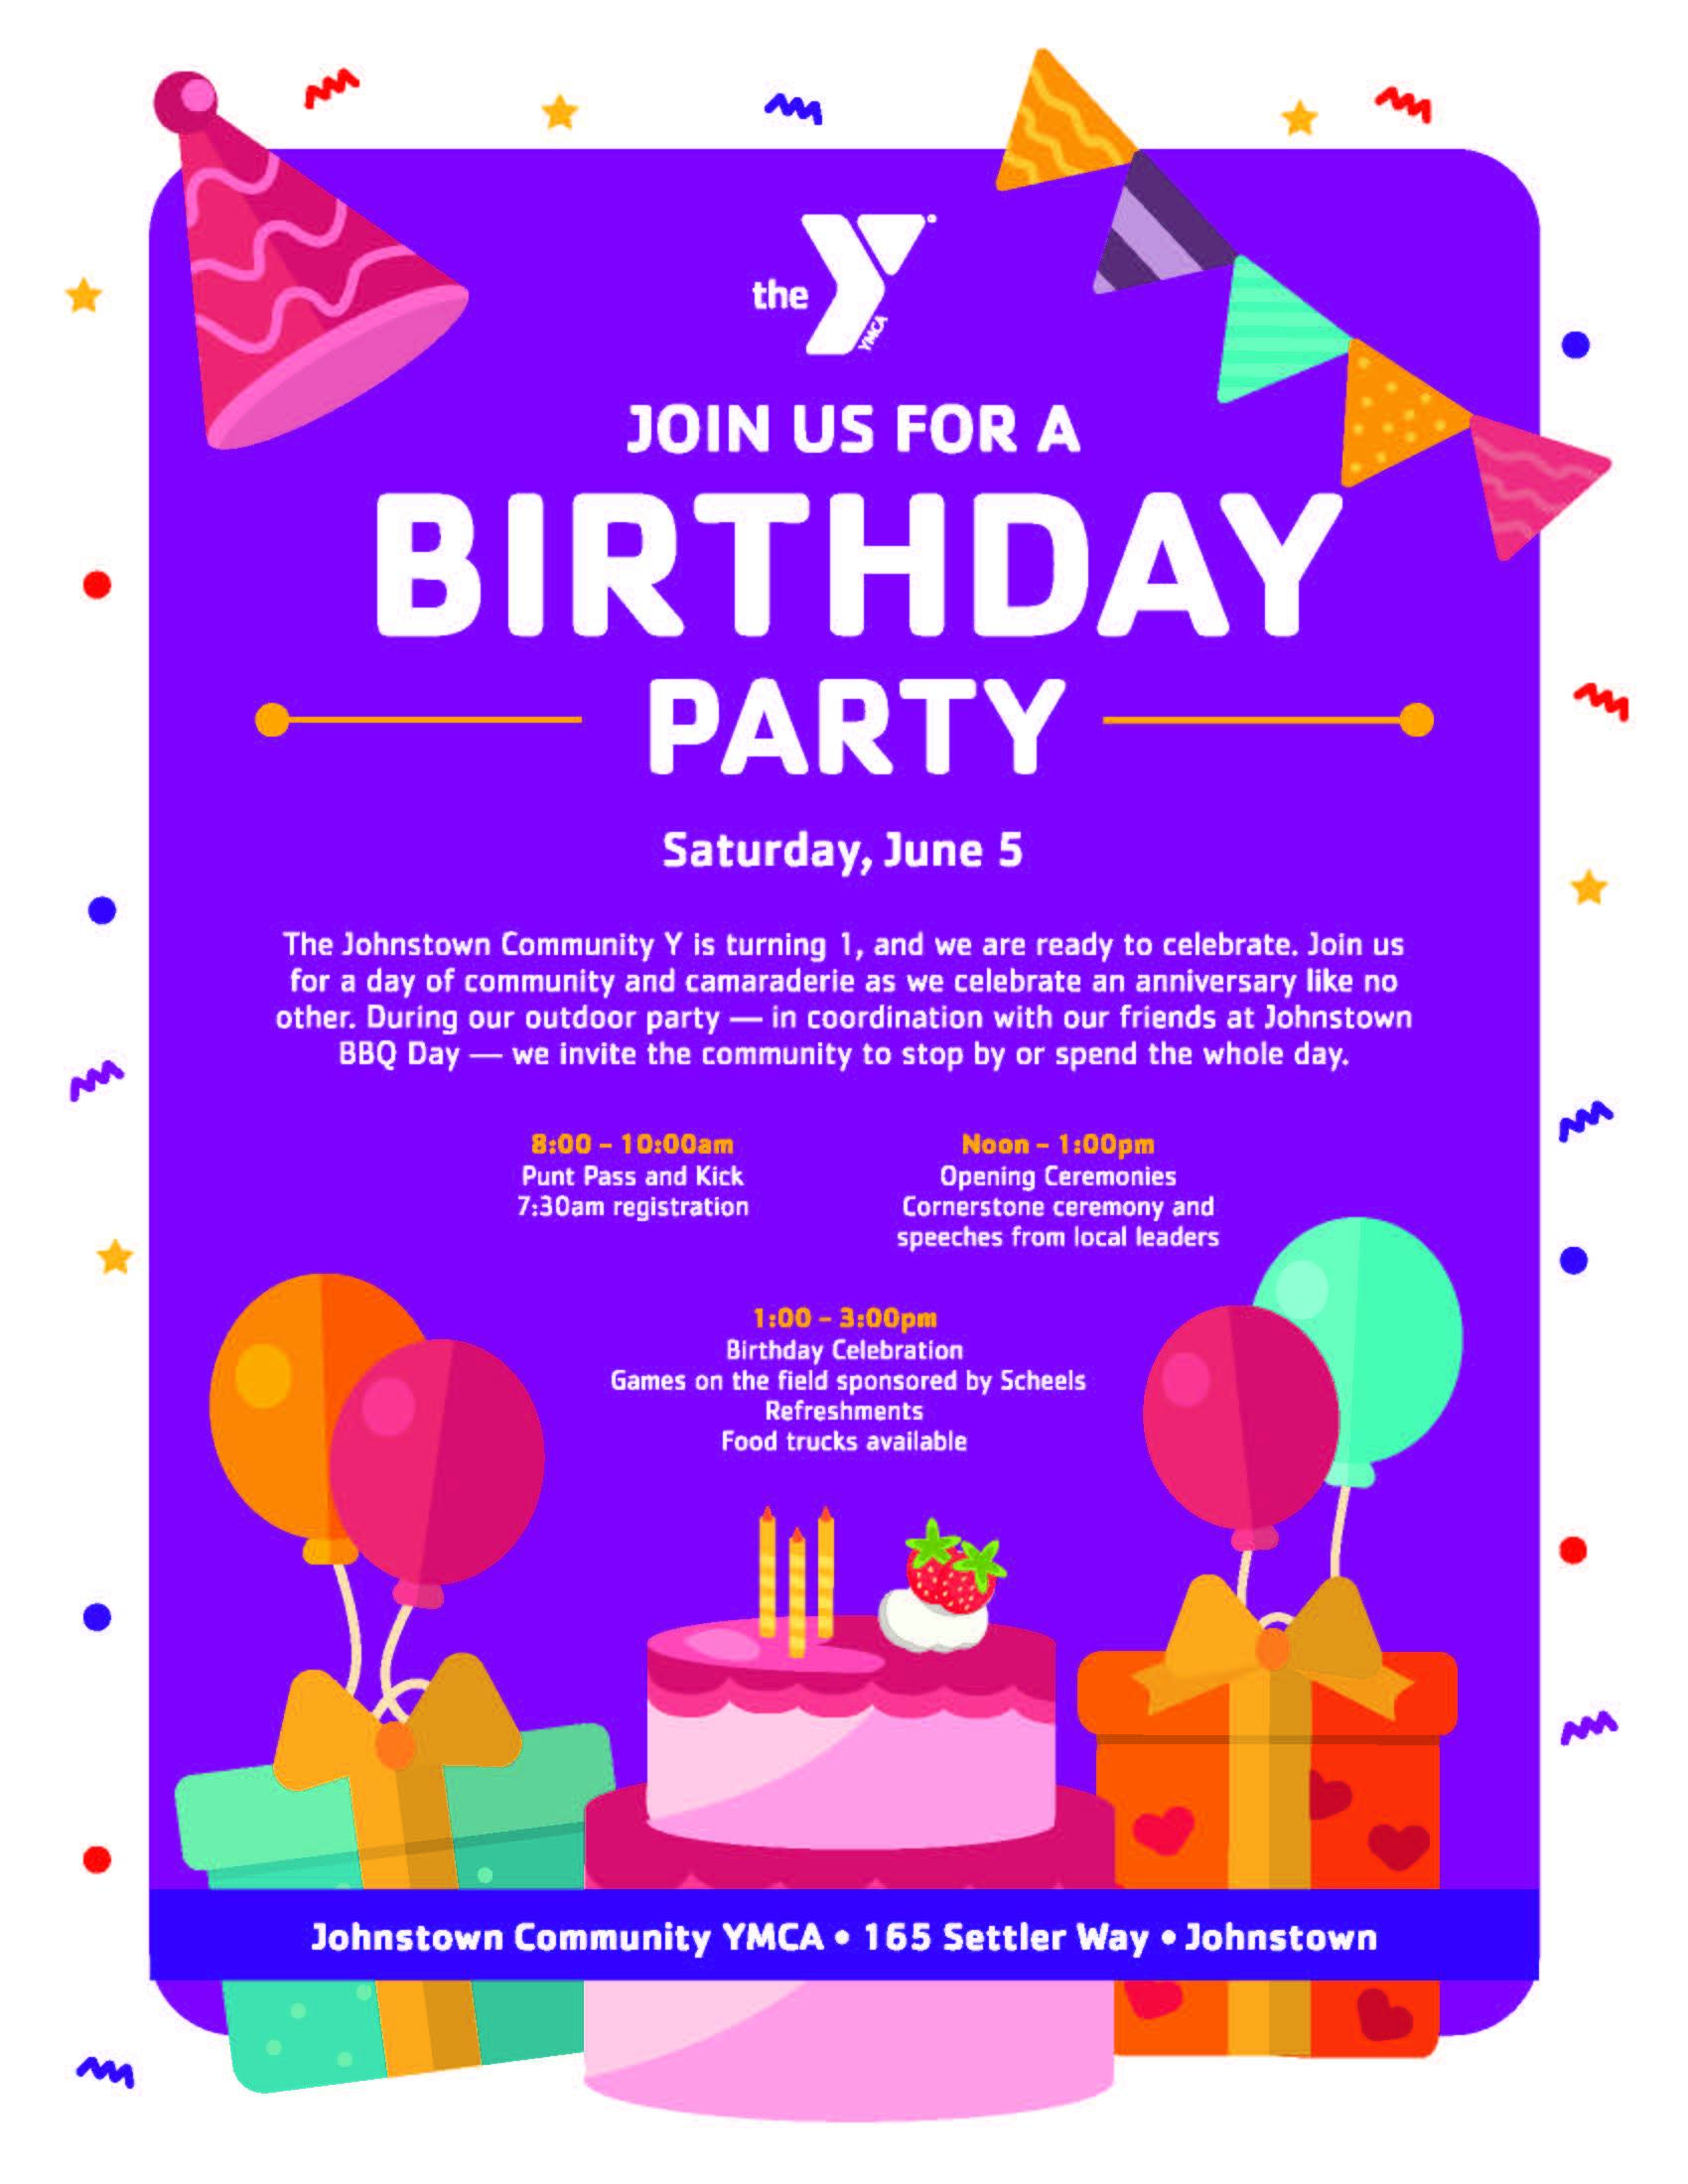 Jtown YMCA Bday Party graphic - text from the graphic is noted on this article page in full. 